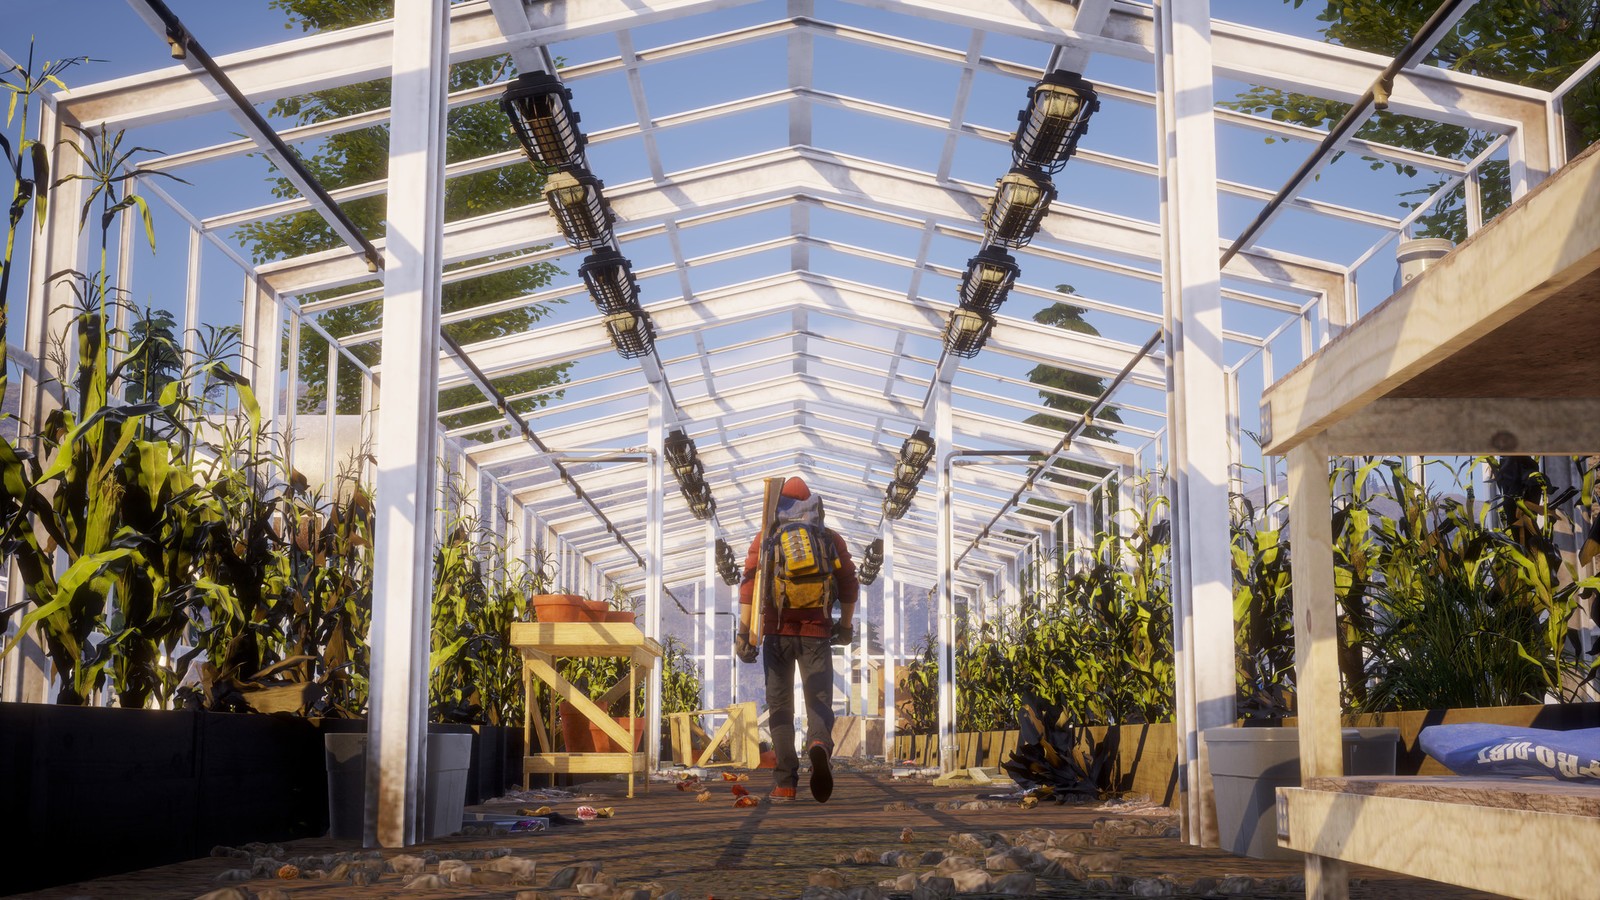 State of Decay 2 Launch Trailer and Screenshots Released – Capsule Computers